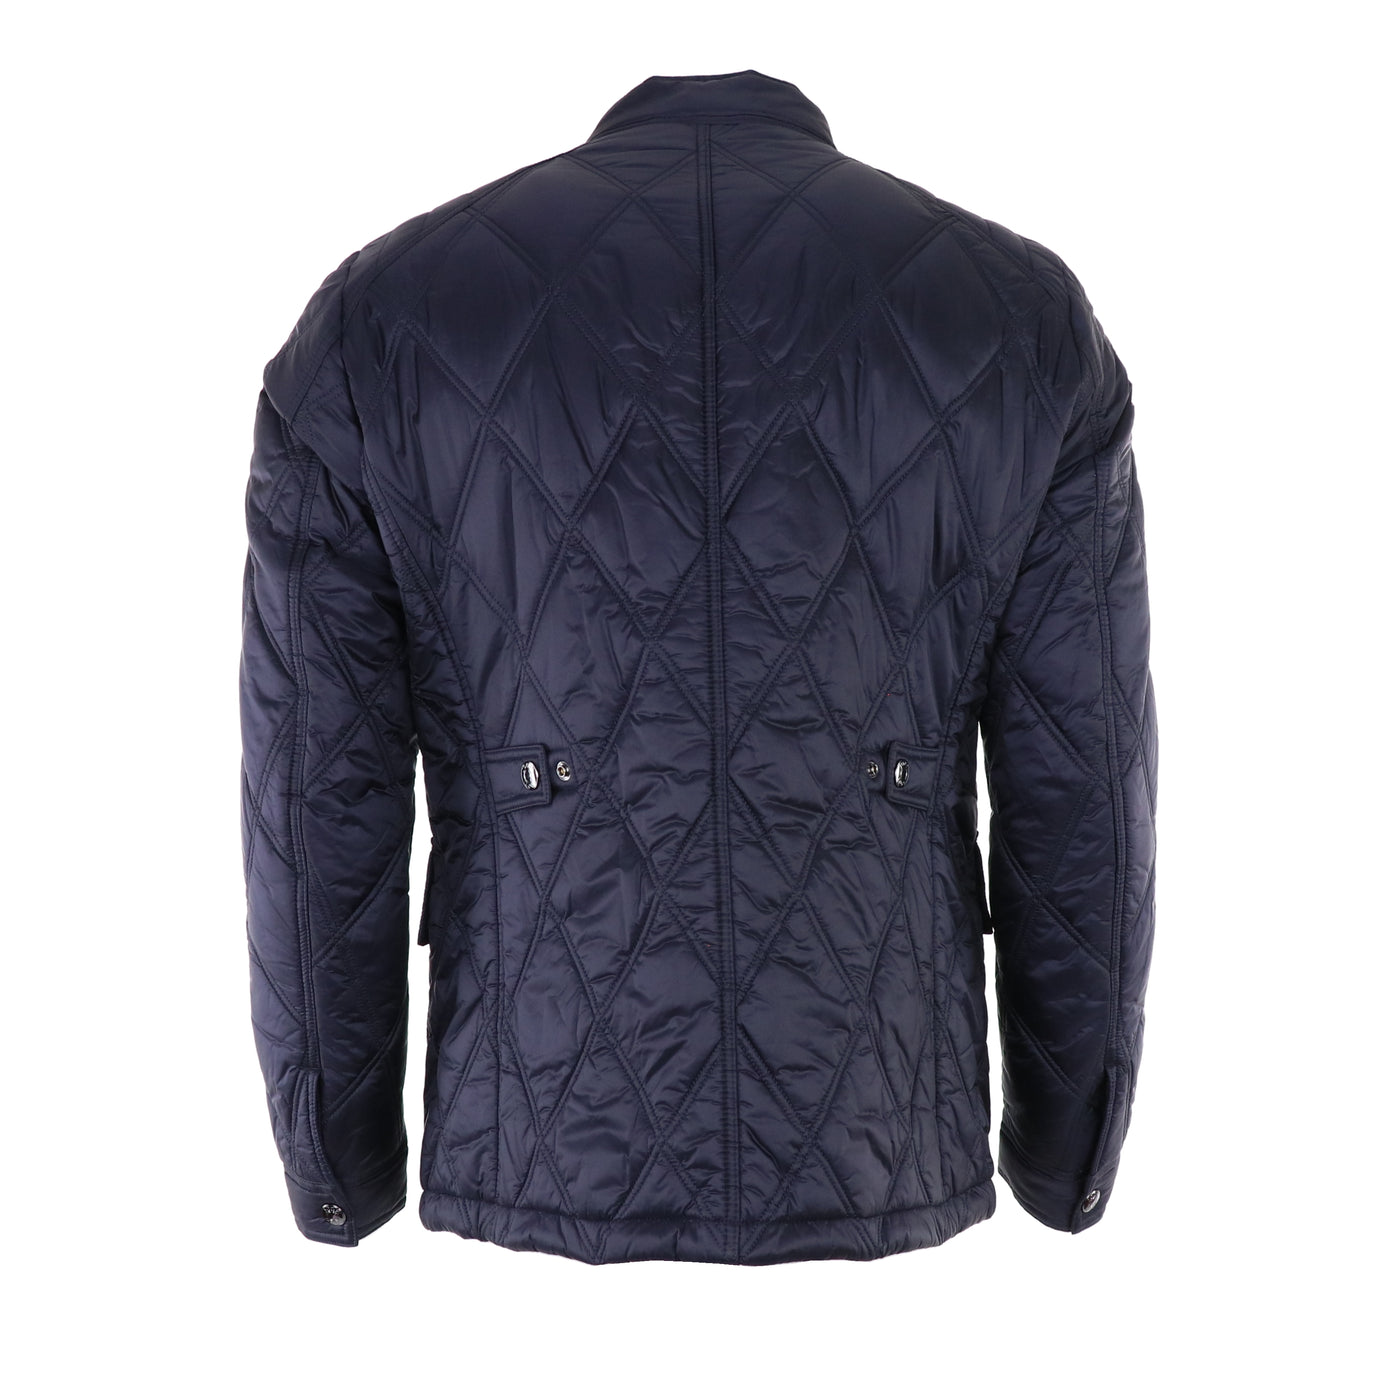 Diamond Quilted Technical Moto Jacket